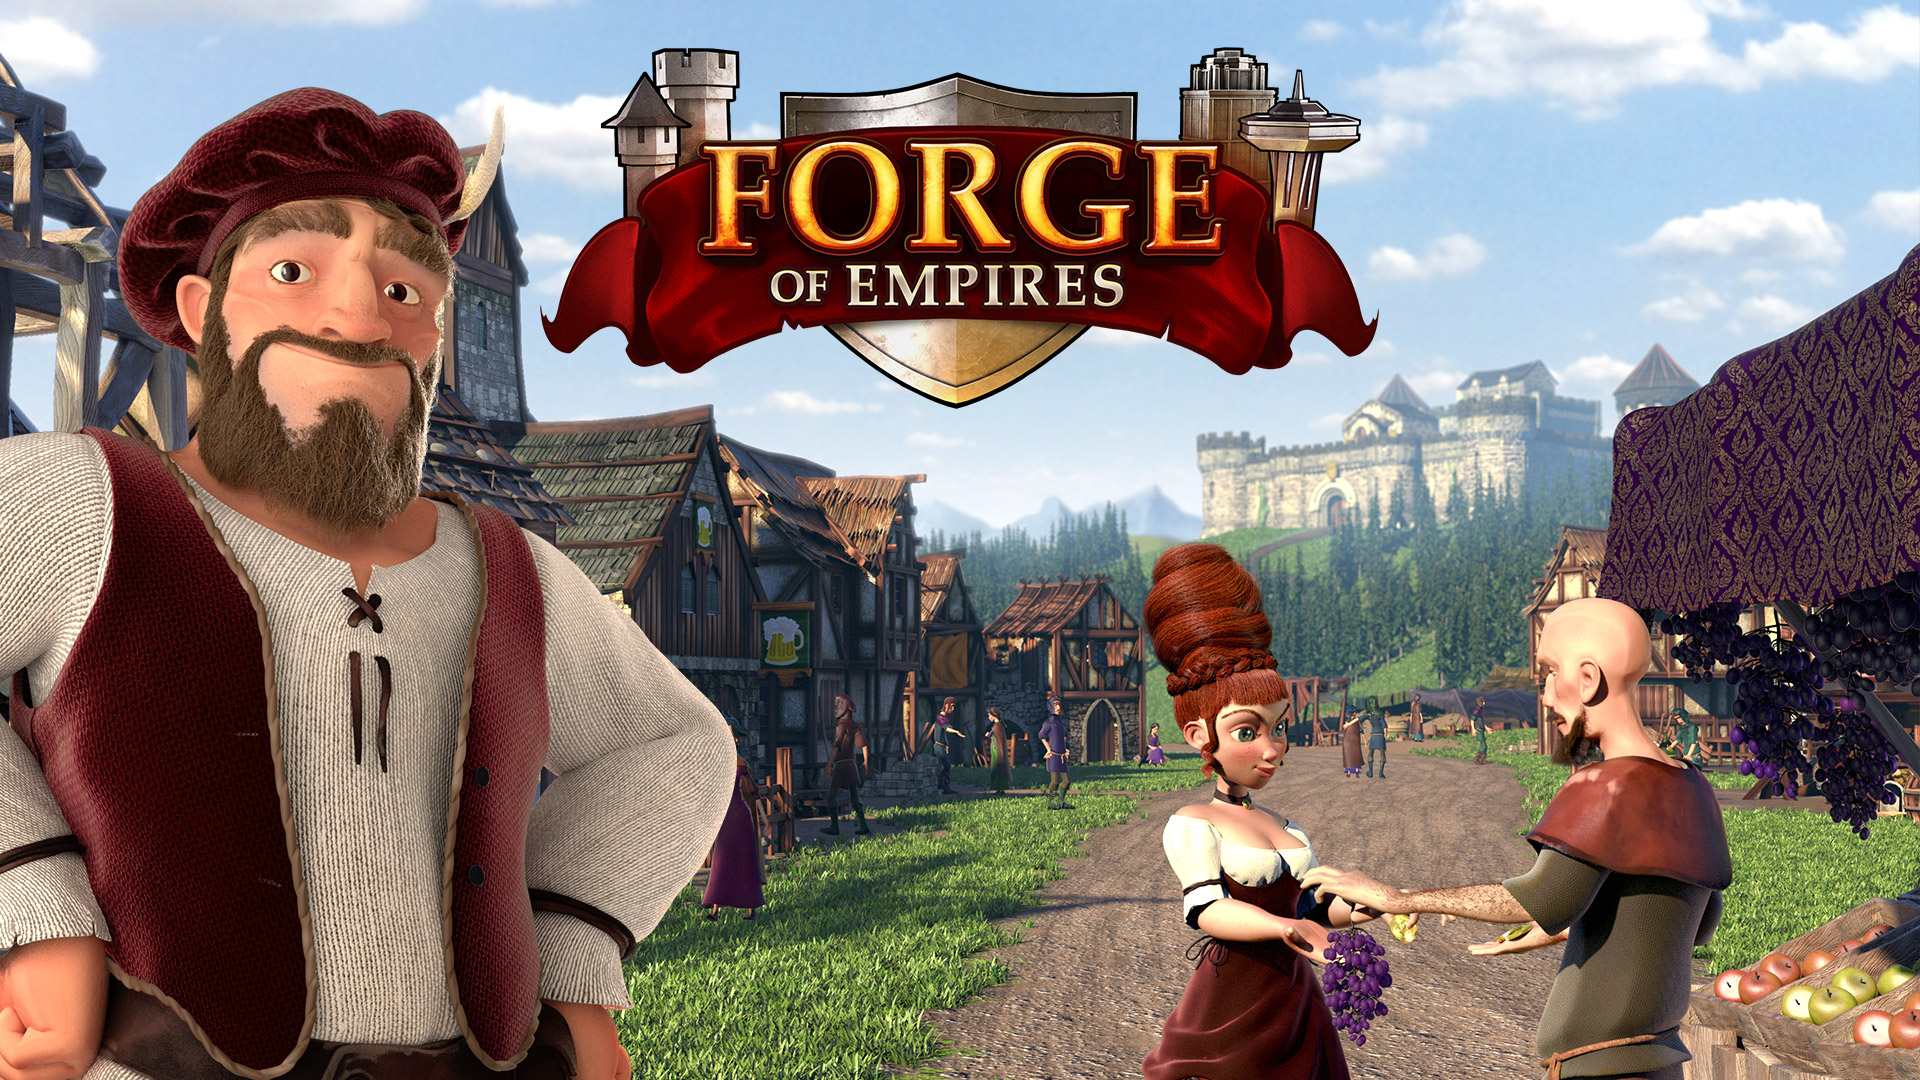 2018 carnival forge of empires